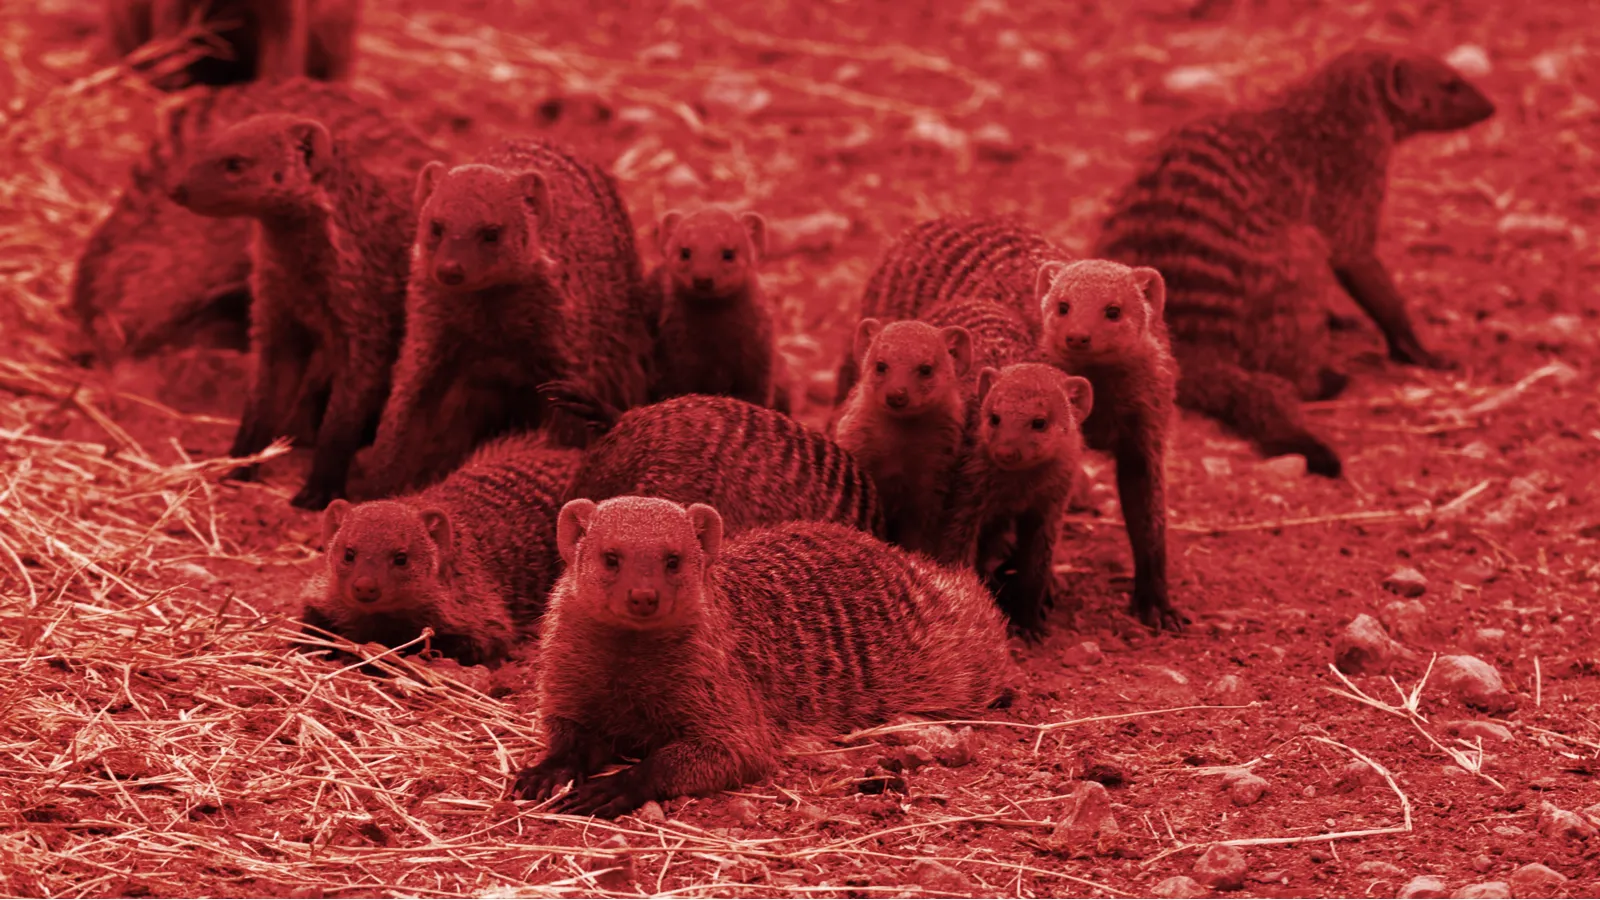 Mongoose Coin has been created on various crypto networks. Image: Shutterstock